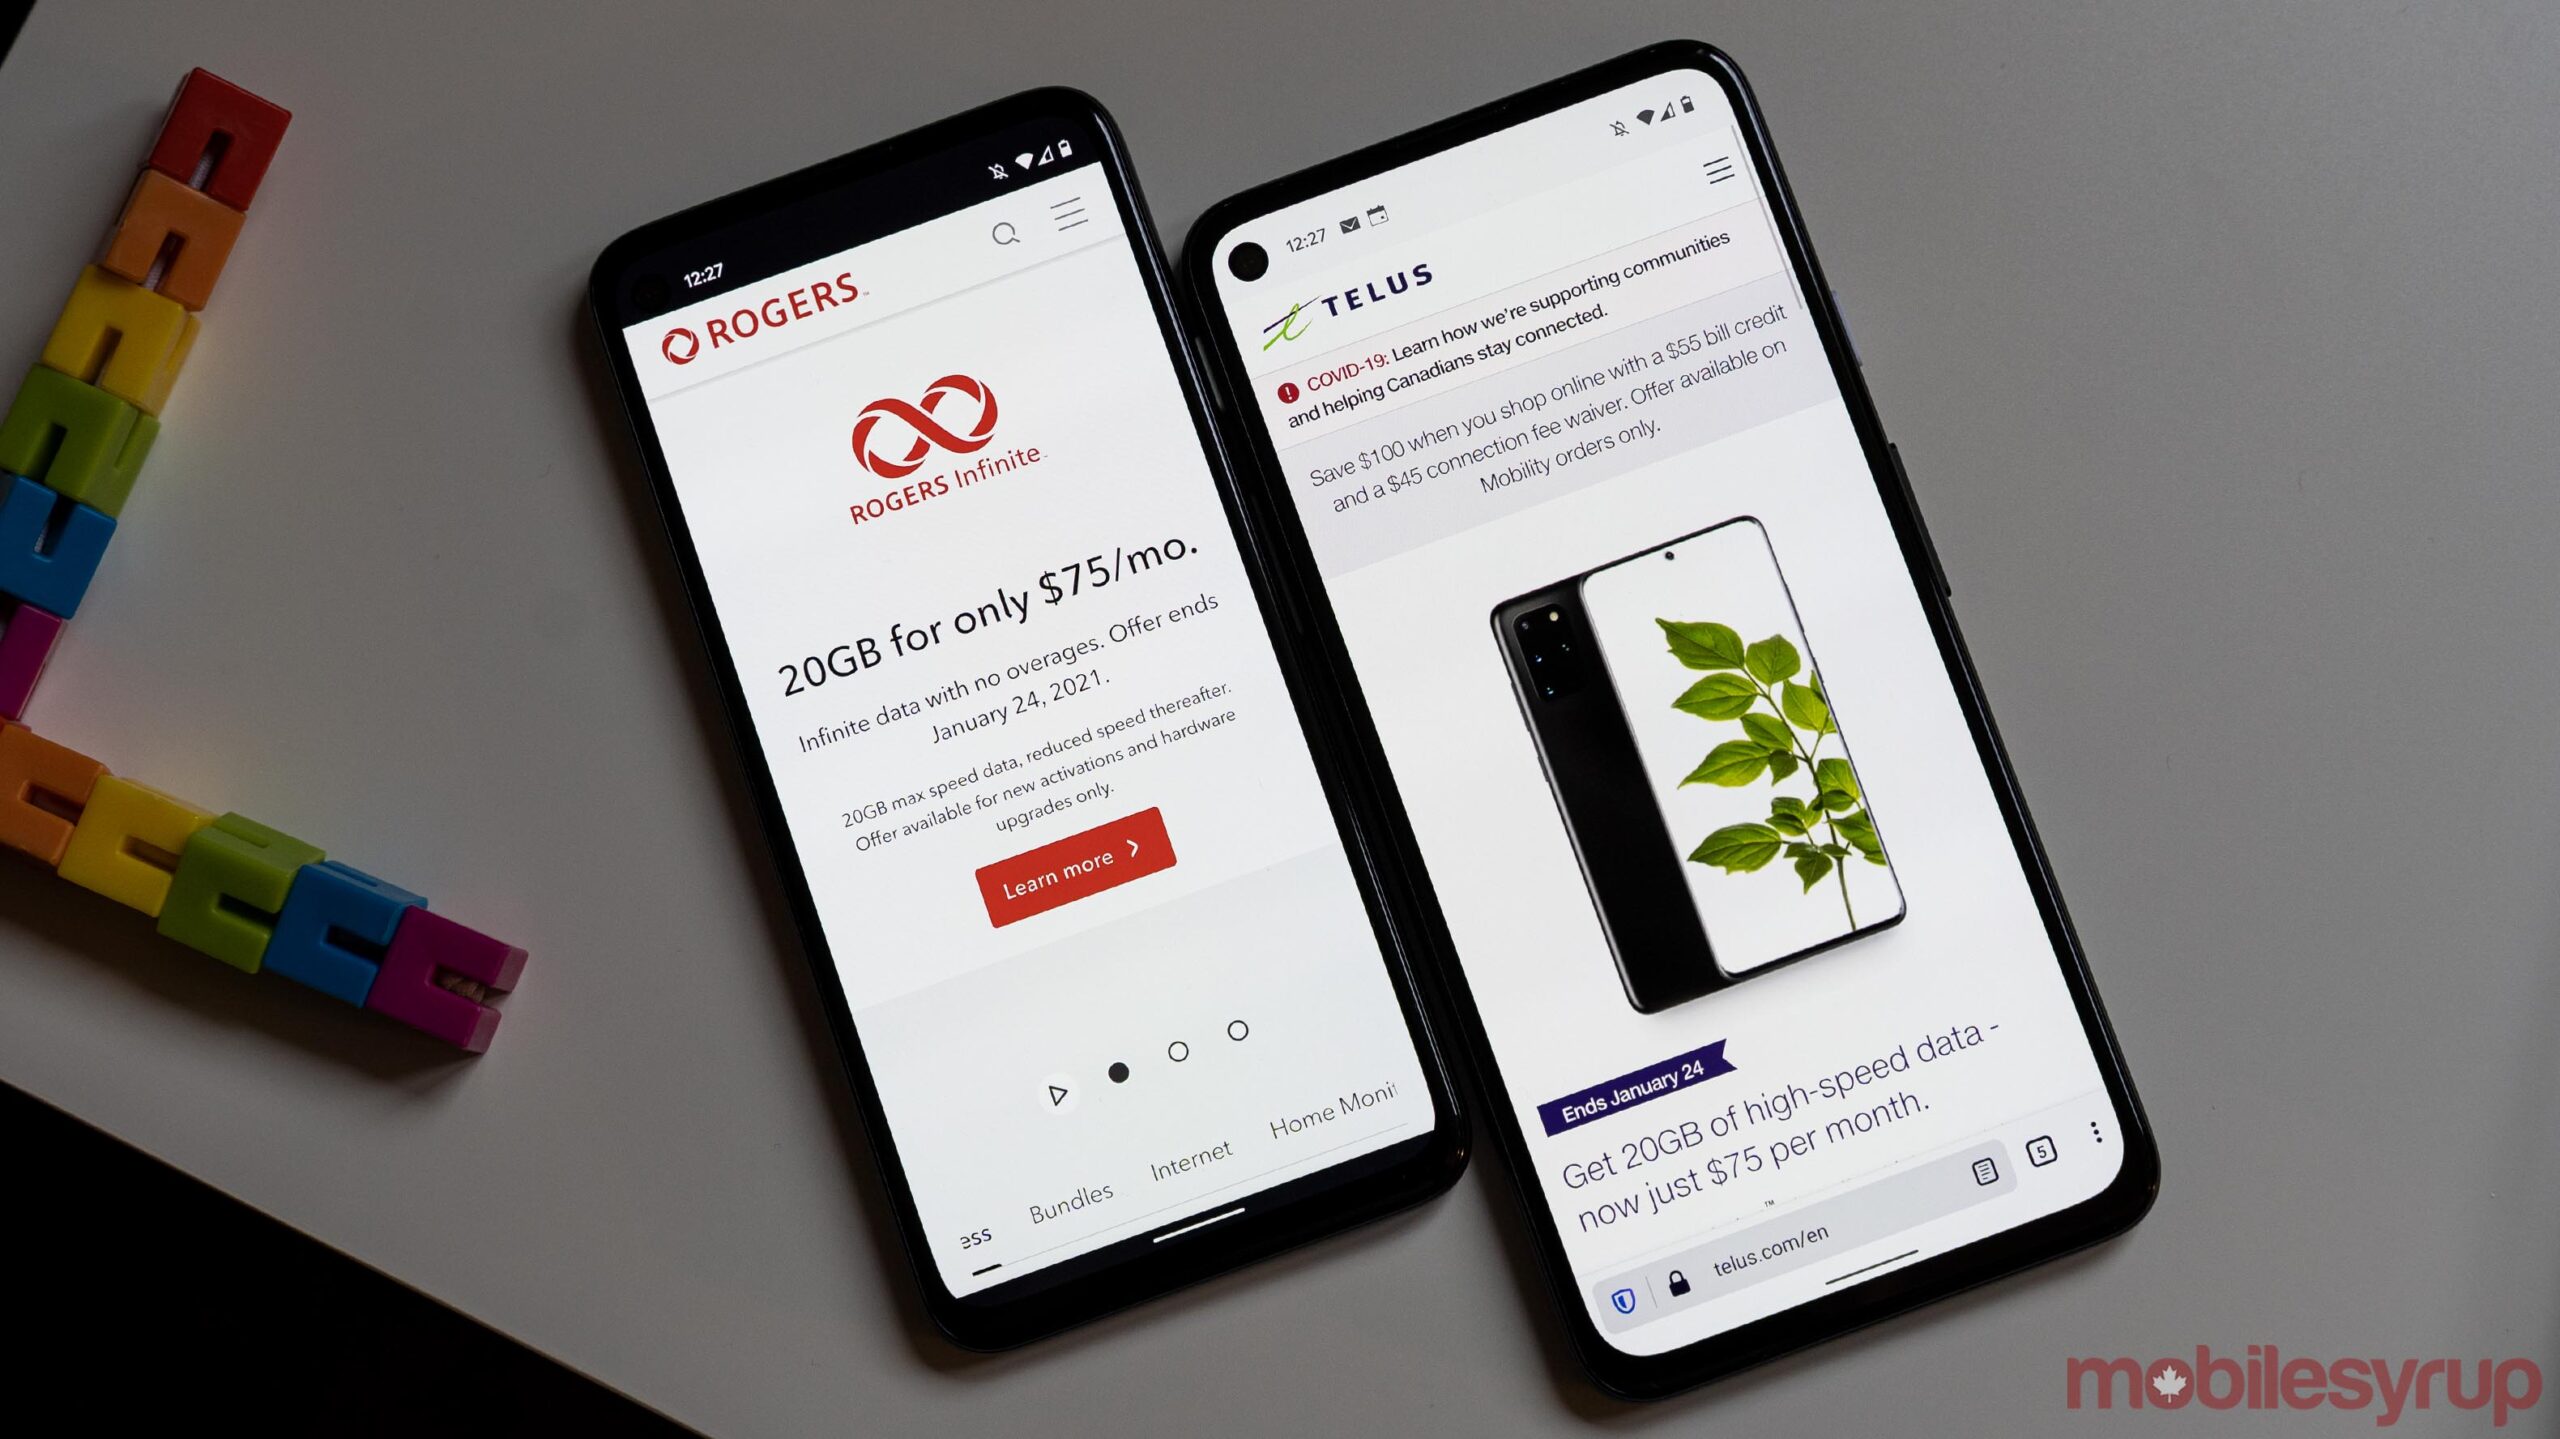 Rogers and Telus websites on mobile phones